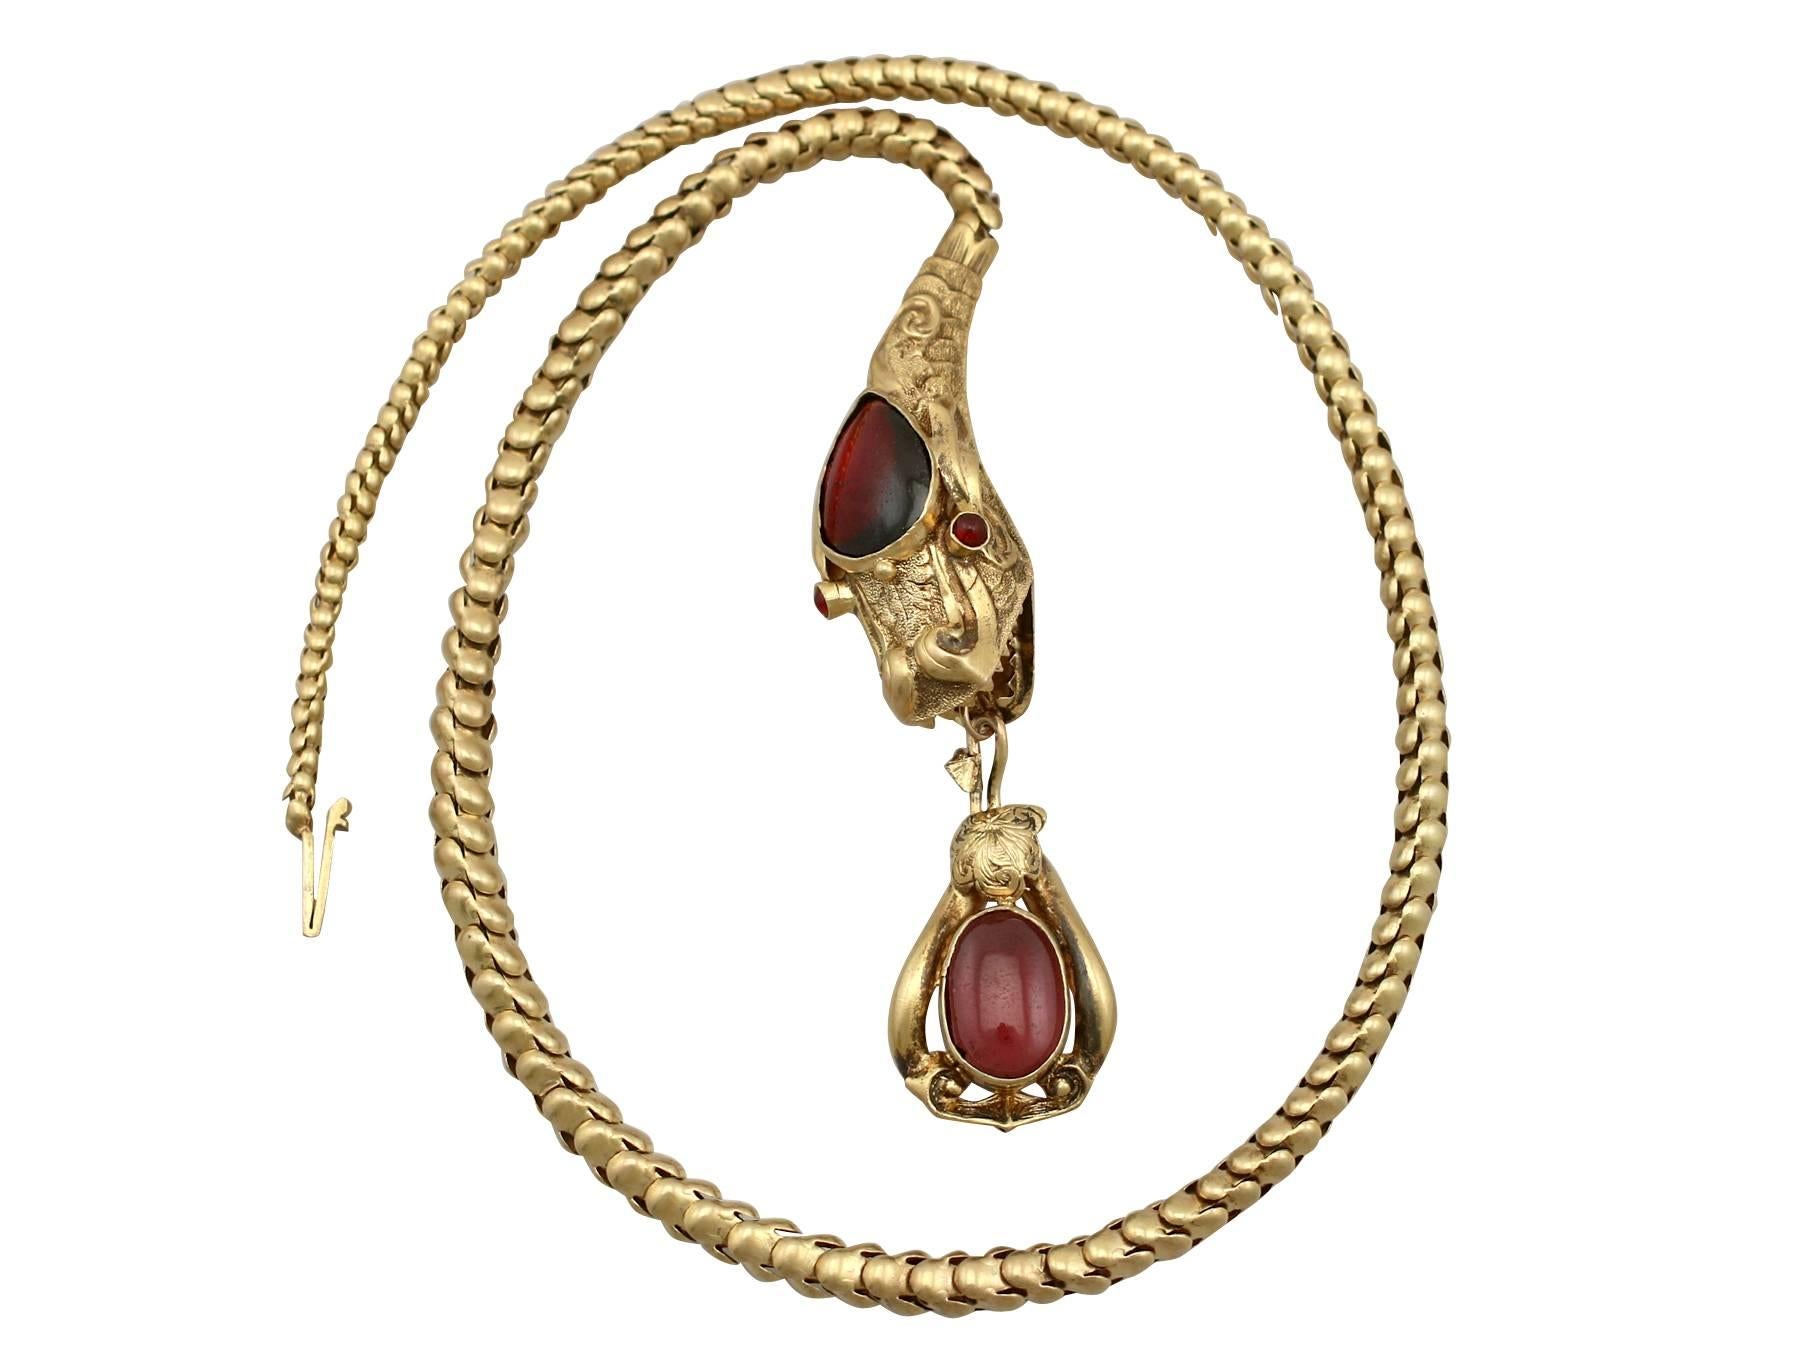 A stunning antique Victorian 3.92 carat garnet and 20 karat yellow gold necklace in the form of a dragon; part of our diverse antique jewelry and estate jewelry collections


This stunning fine and impressive dragon necklace has been crafted in 20 k